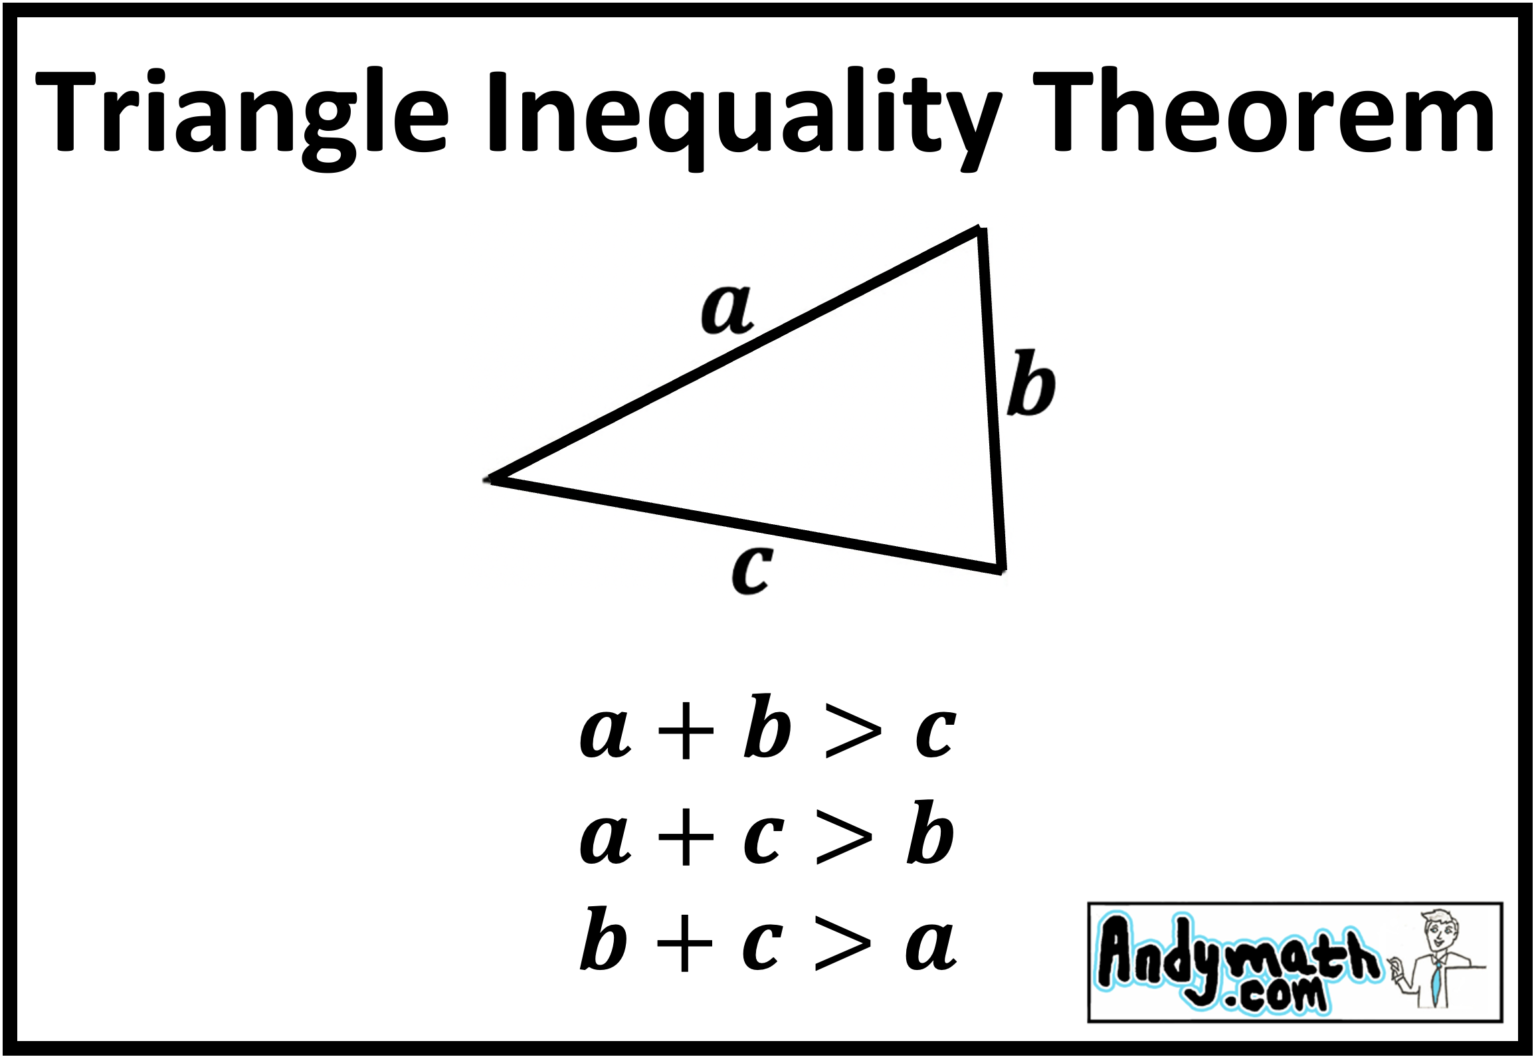 triangle inequality theorem problem solving